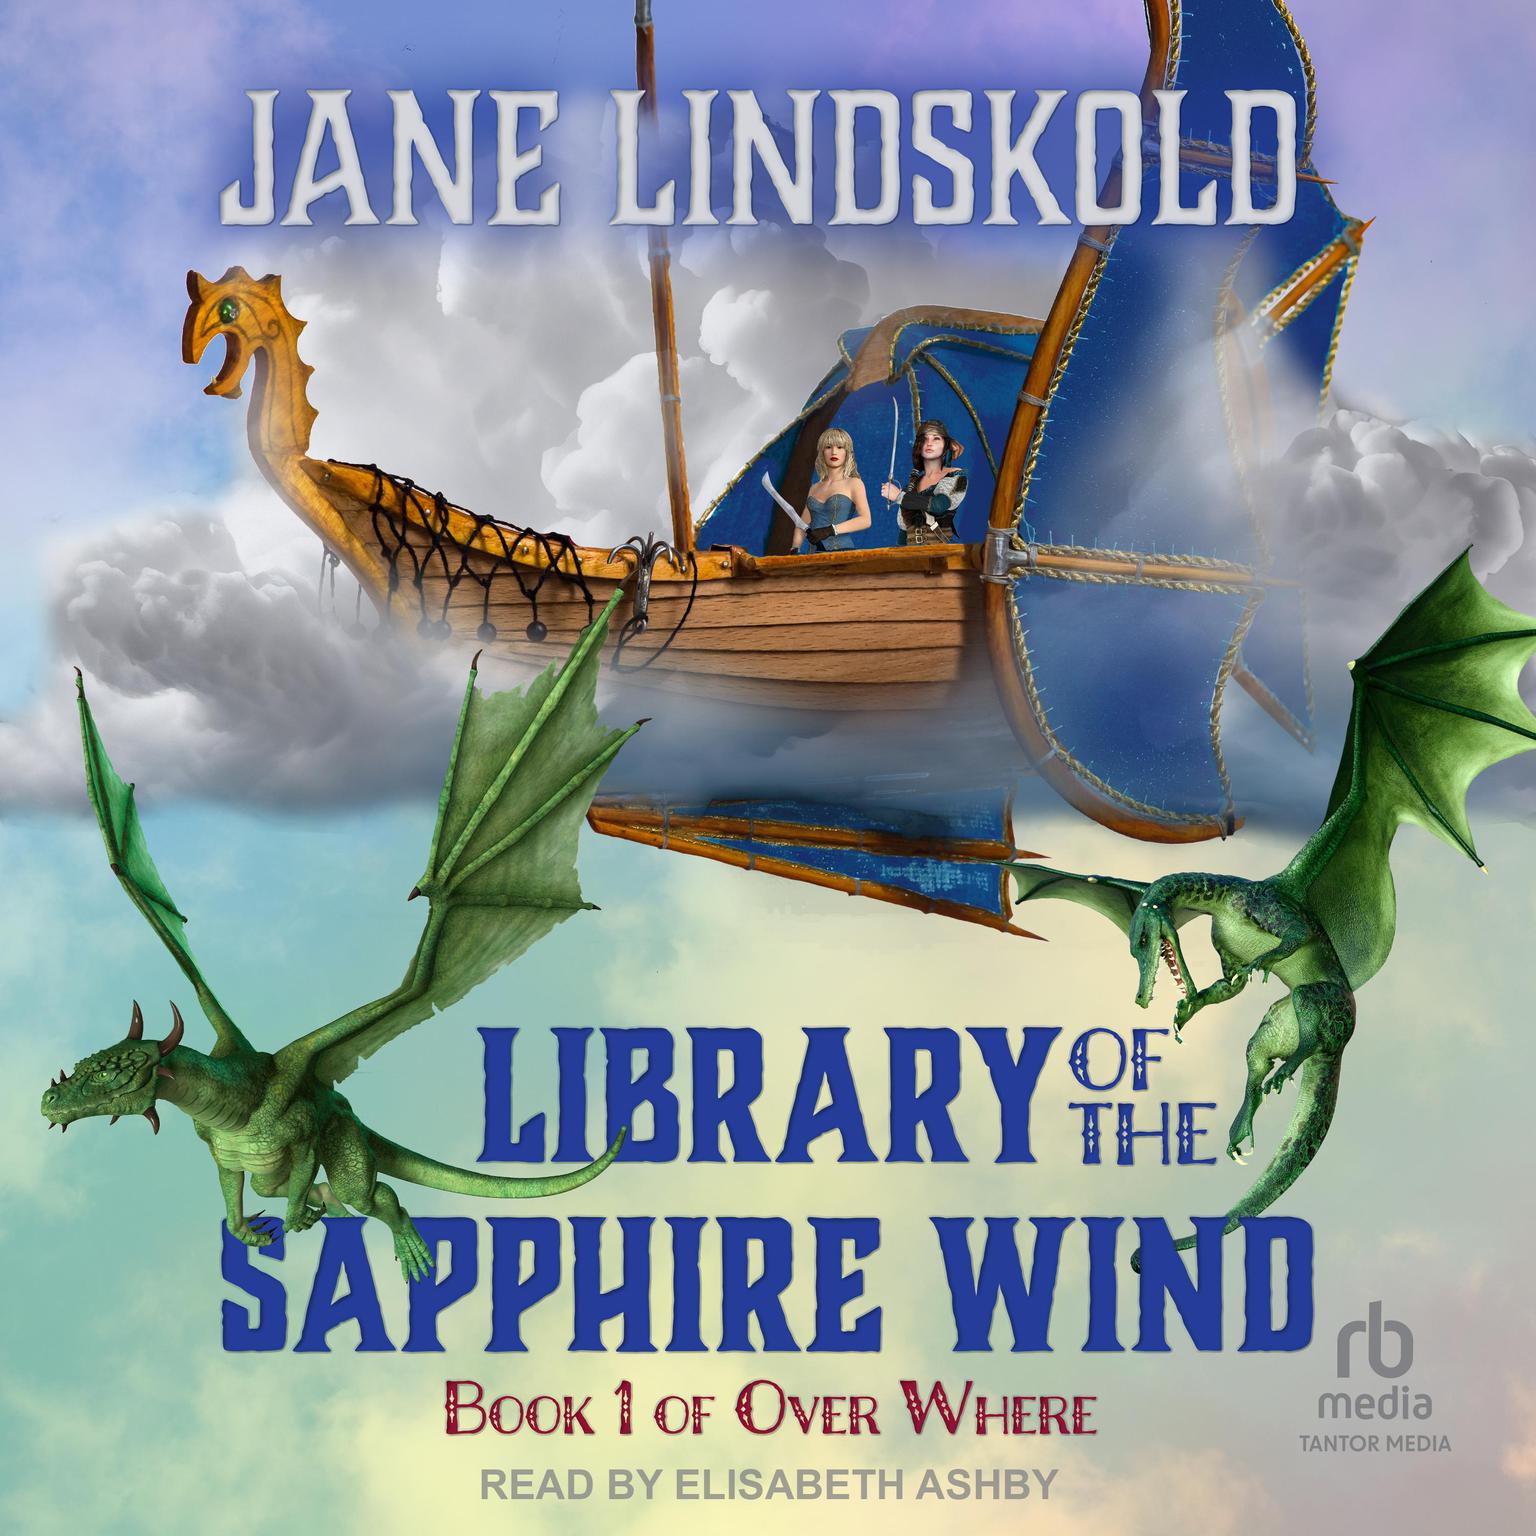 Library of the Sapphire Wind Audiobook, by Jane Lindskold